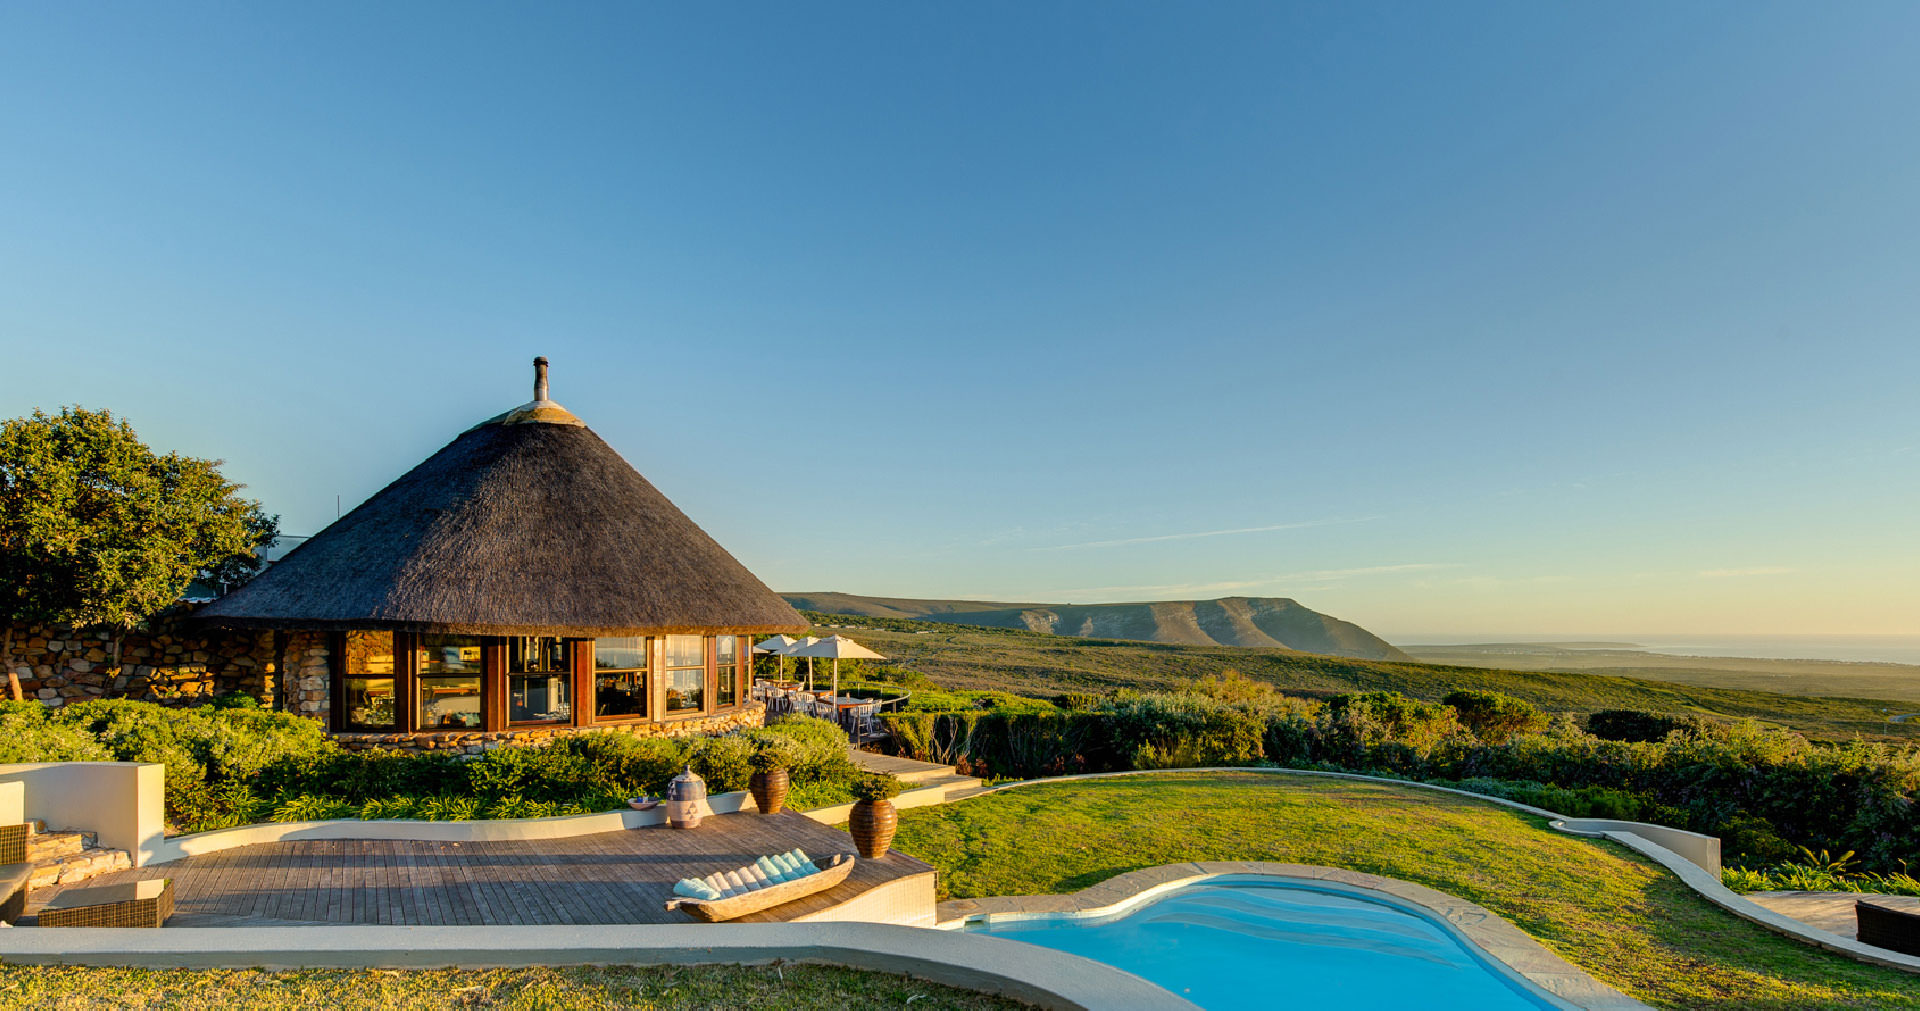 Garden Lodge and Pool at Grootbos Private Nature Reserve